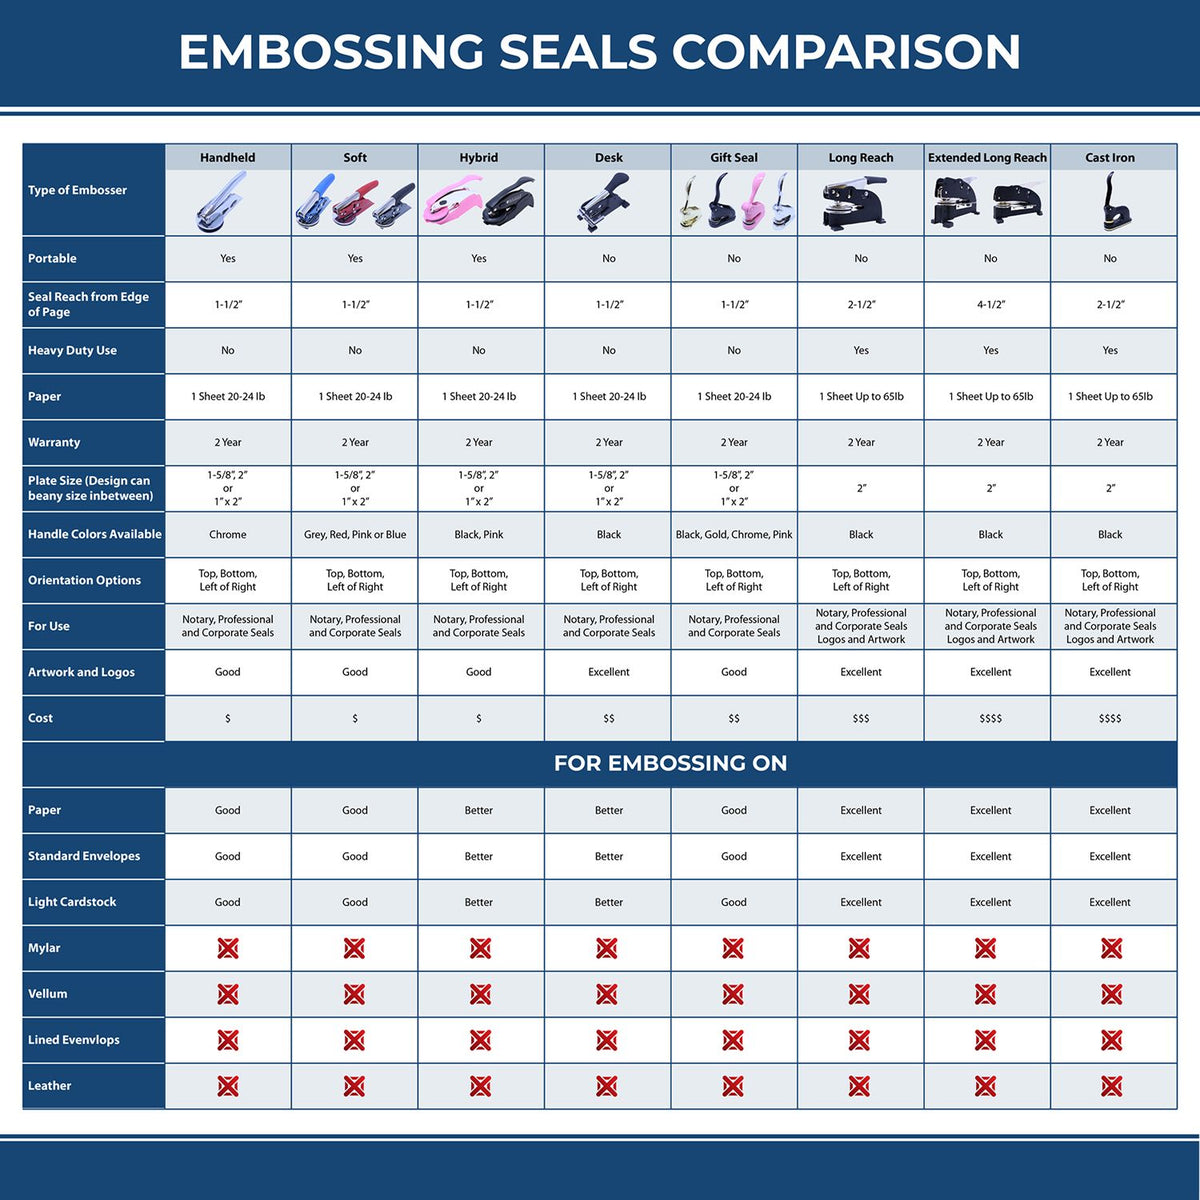 A comparison chart for the different types of mount models available for the Handheld Iowa Professional Engineer Embosser.